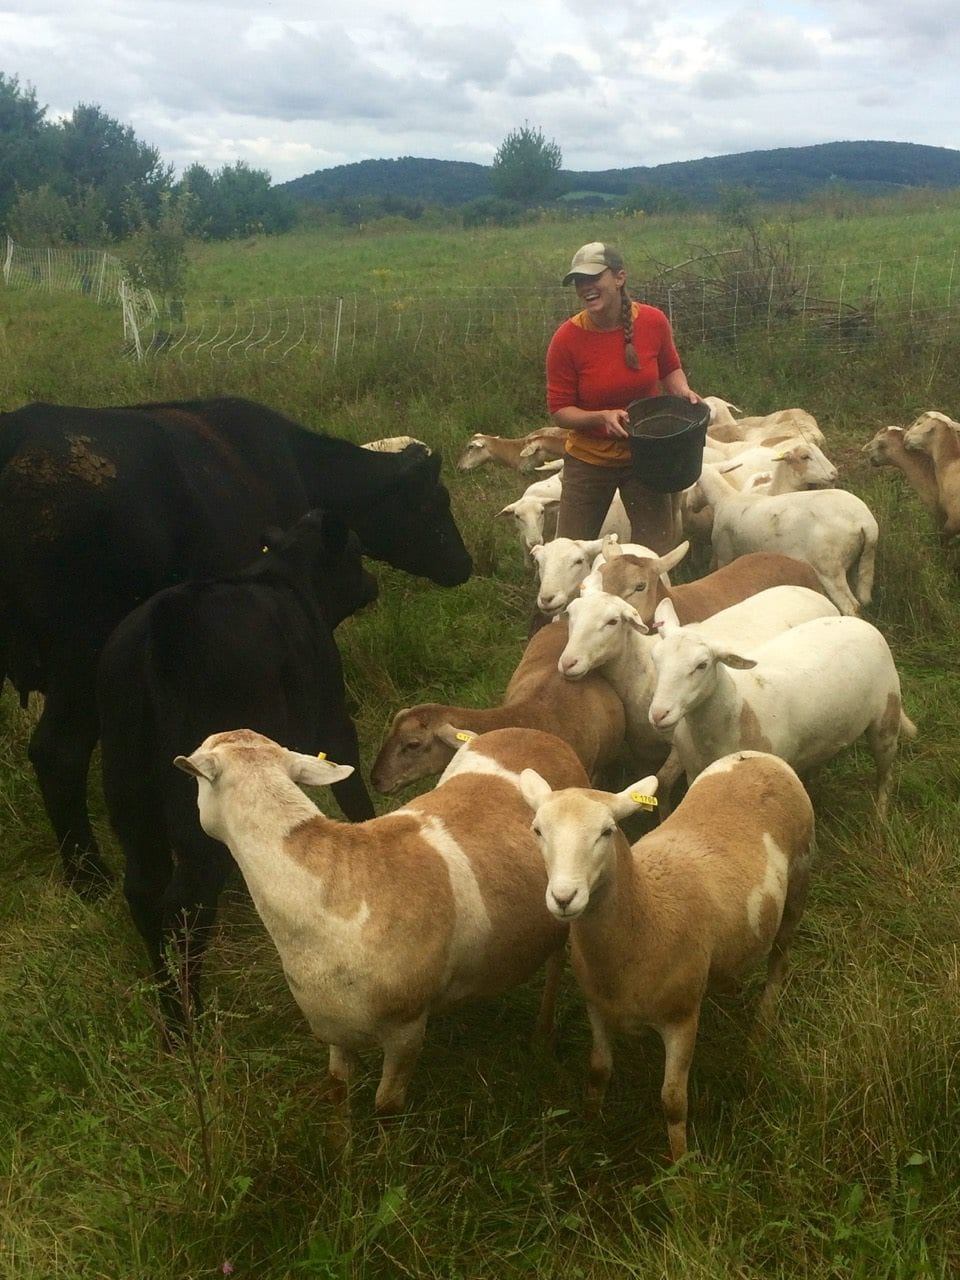 a person stands in a field holding a bucket, surrounded by cattle and goats